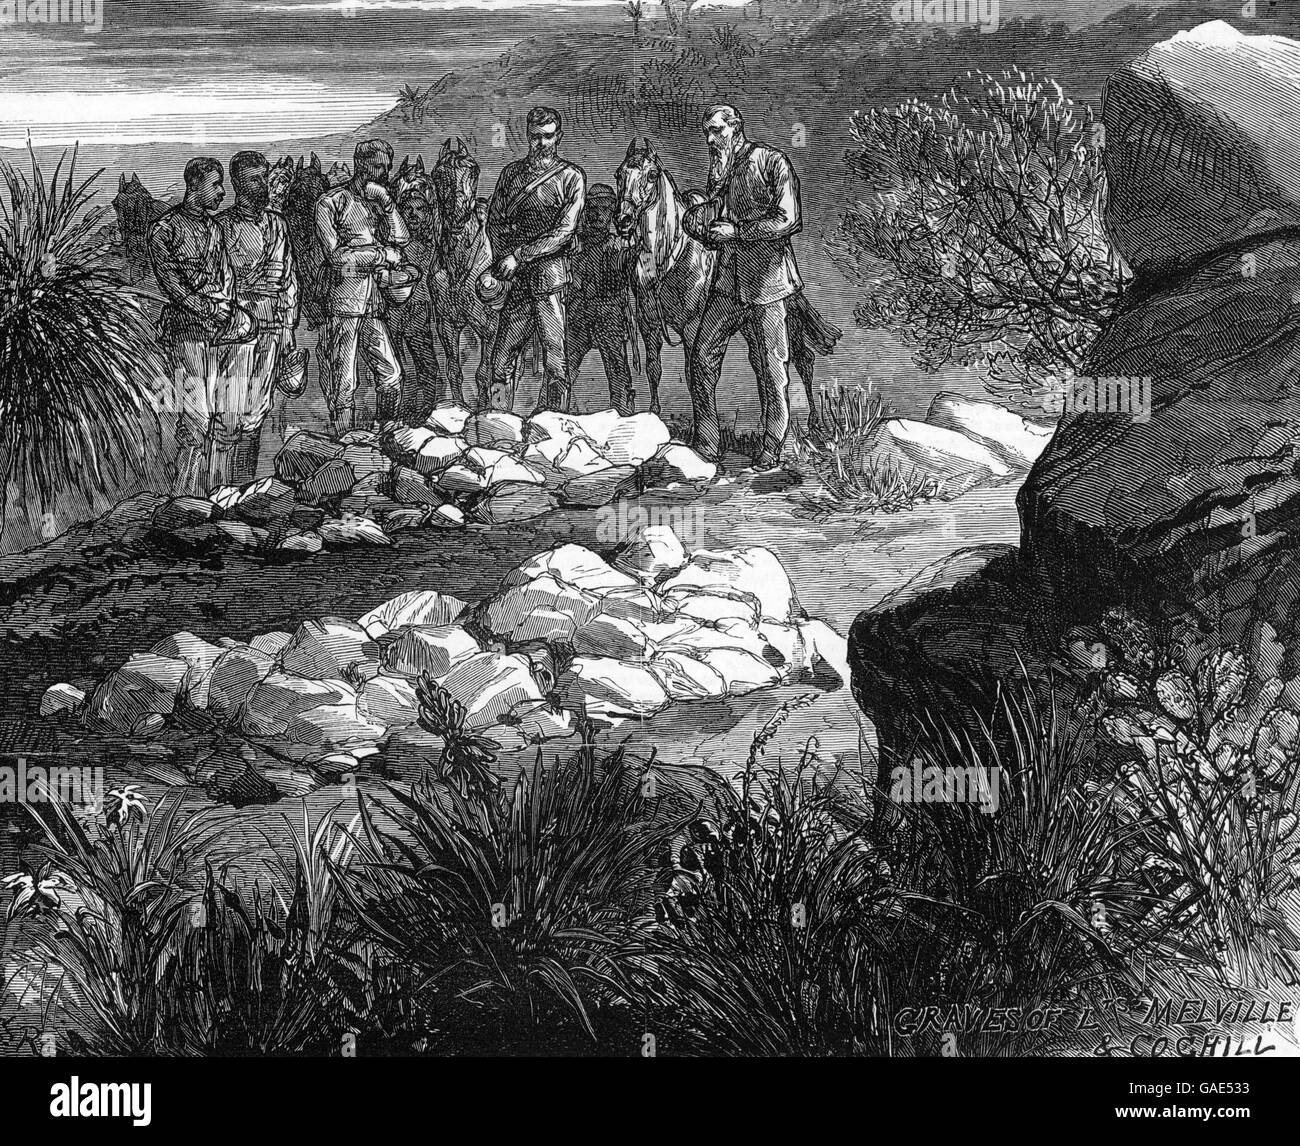 The Zulu War: Sketches at Rorke's Drift, by Lieutenant H.C. Harford, 99th Regiment. 12 April 1879 Stock Photo